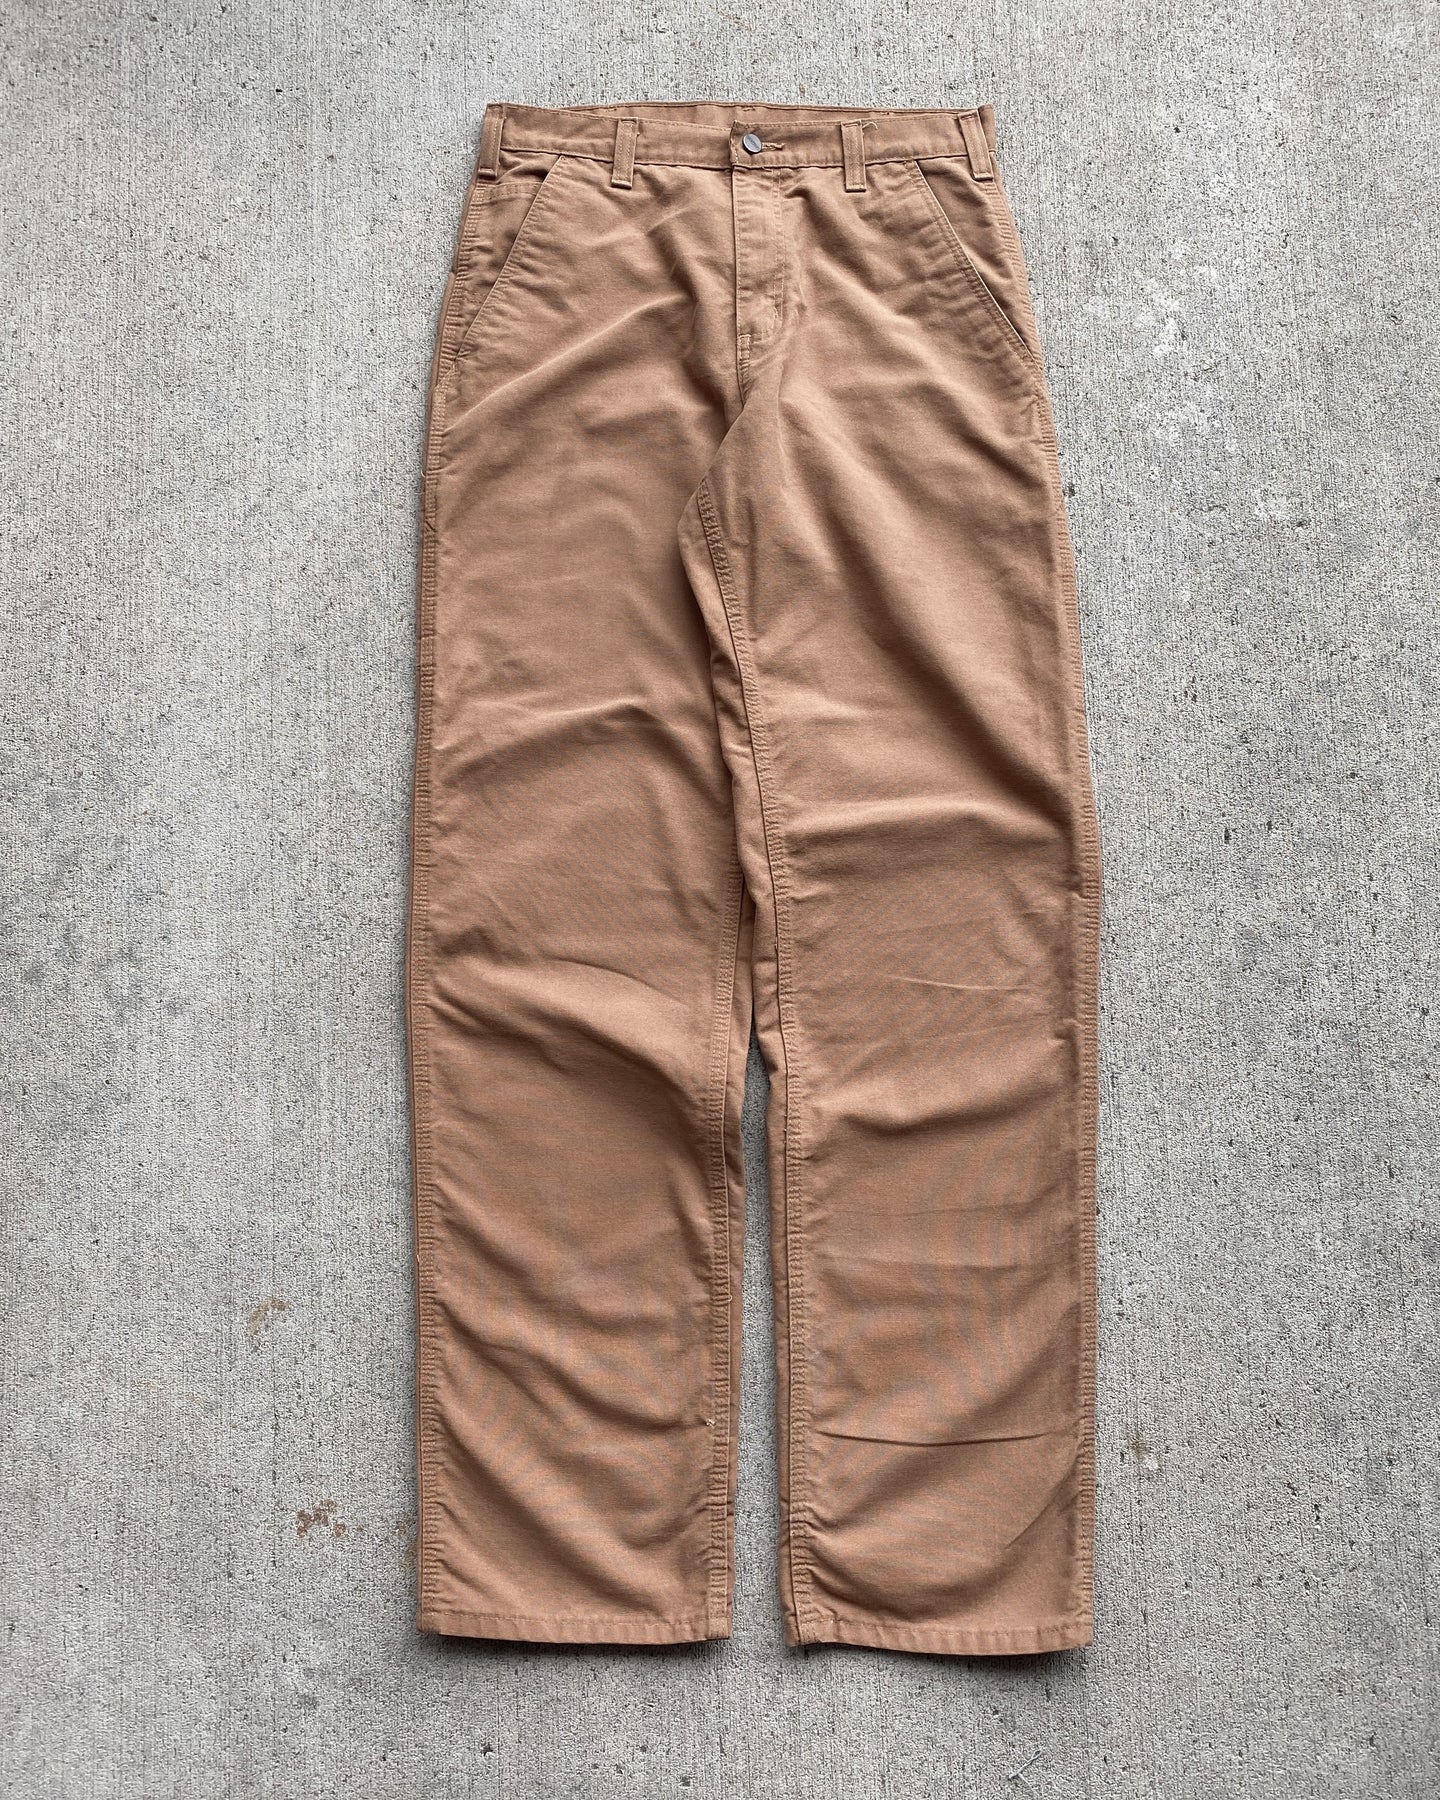 1990s Carhartt Clay Canvas Work Pant - Size 32 x 36